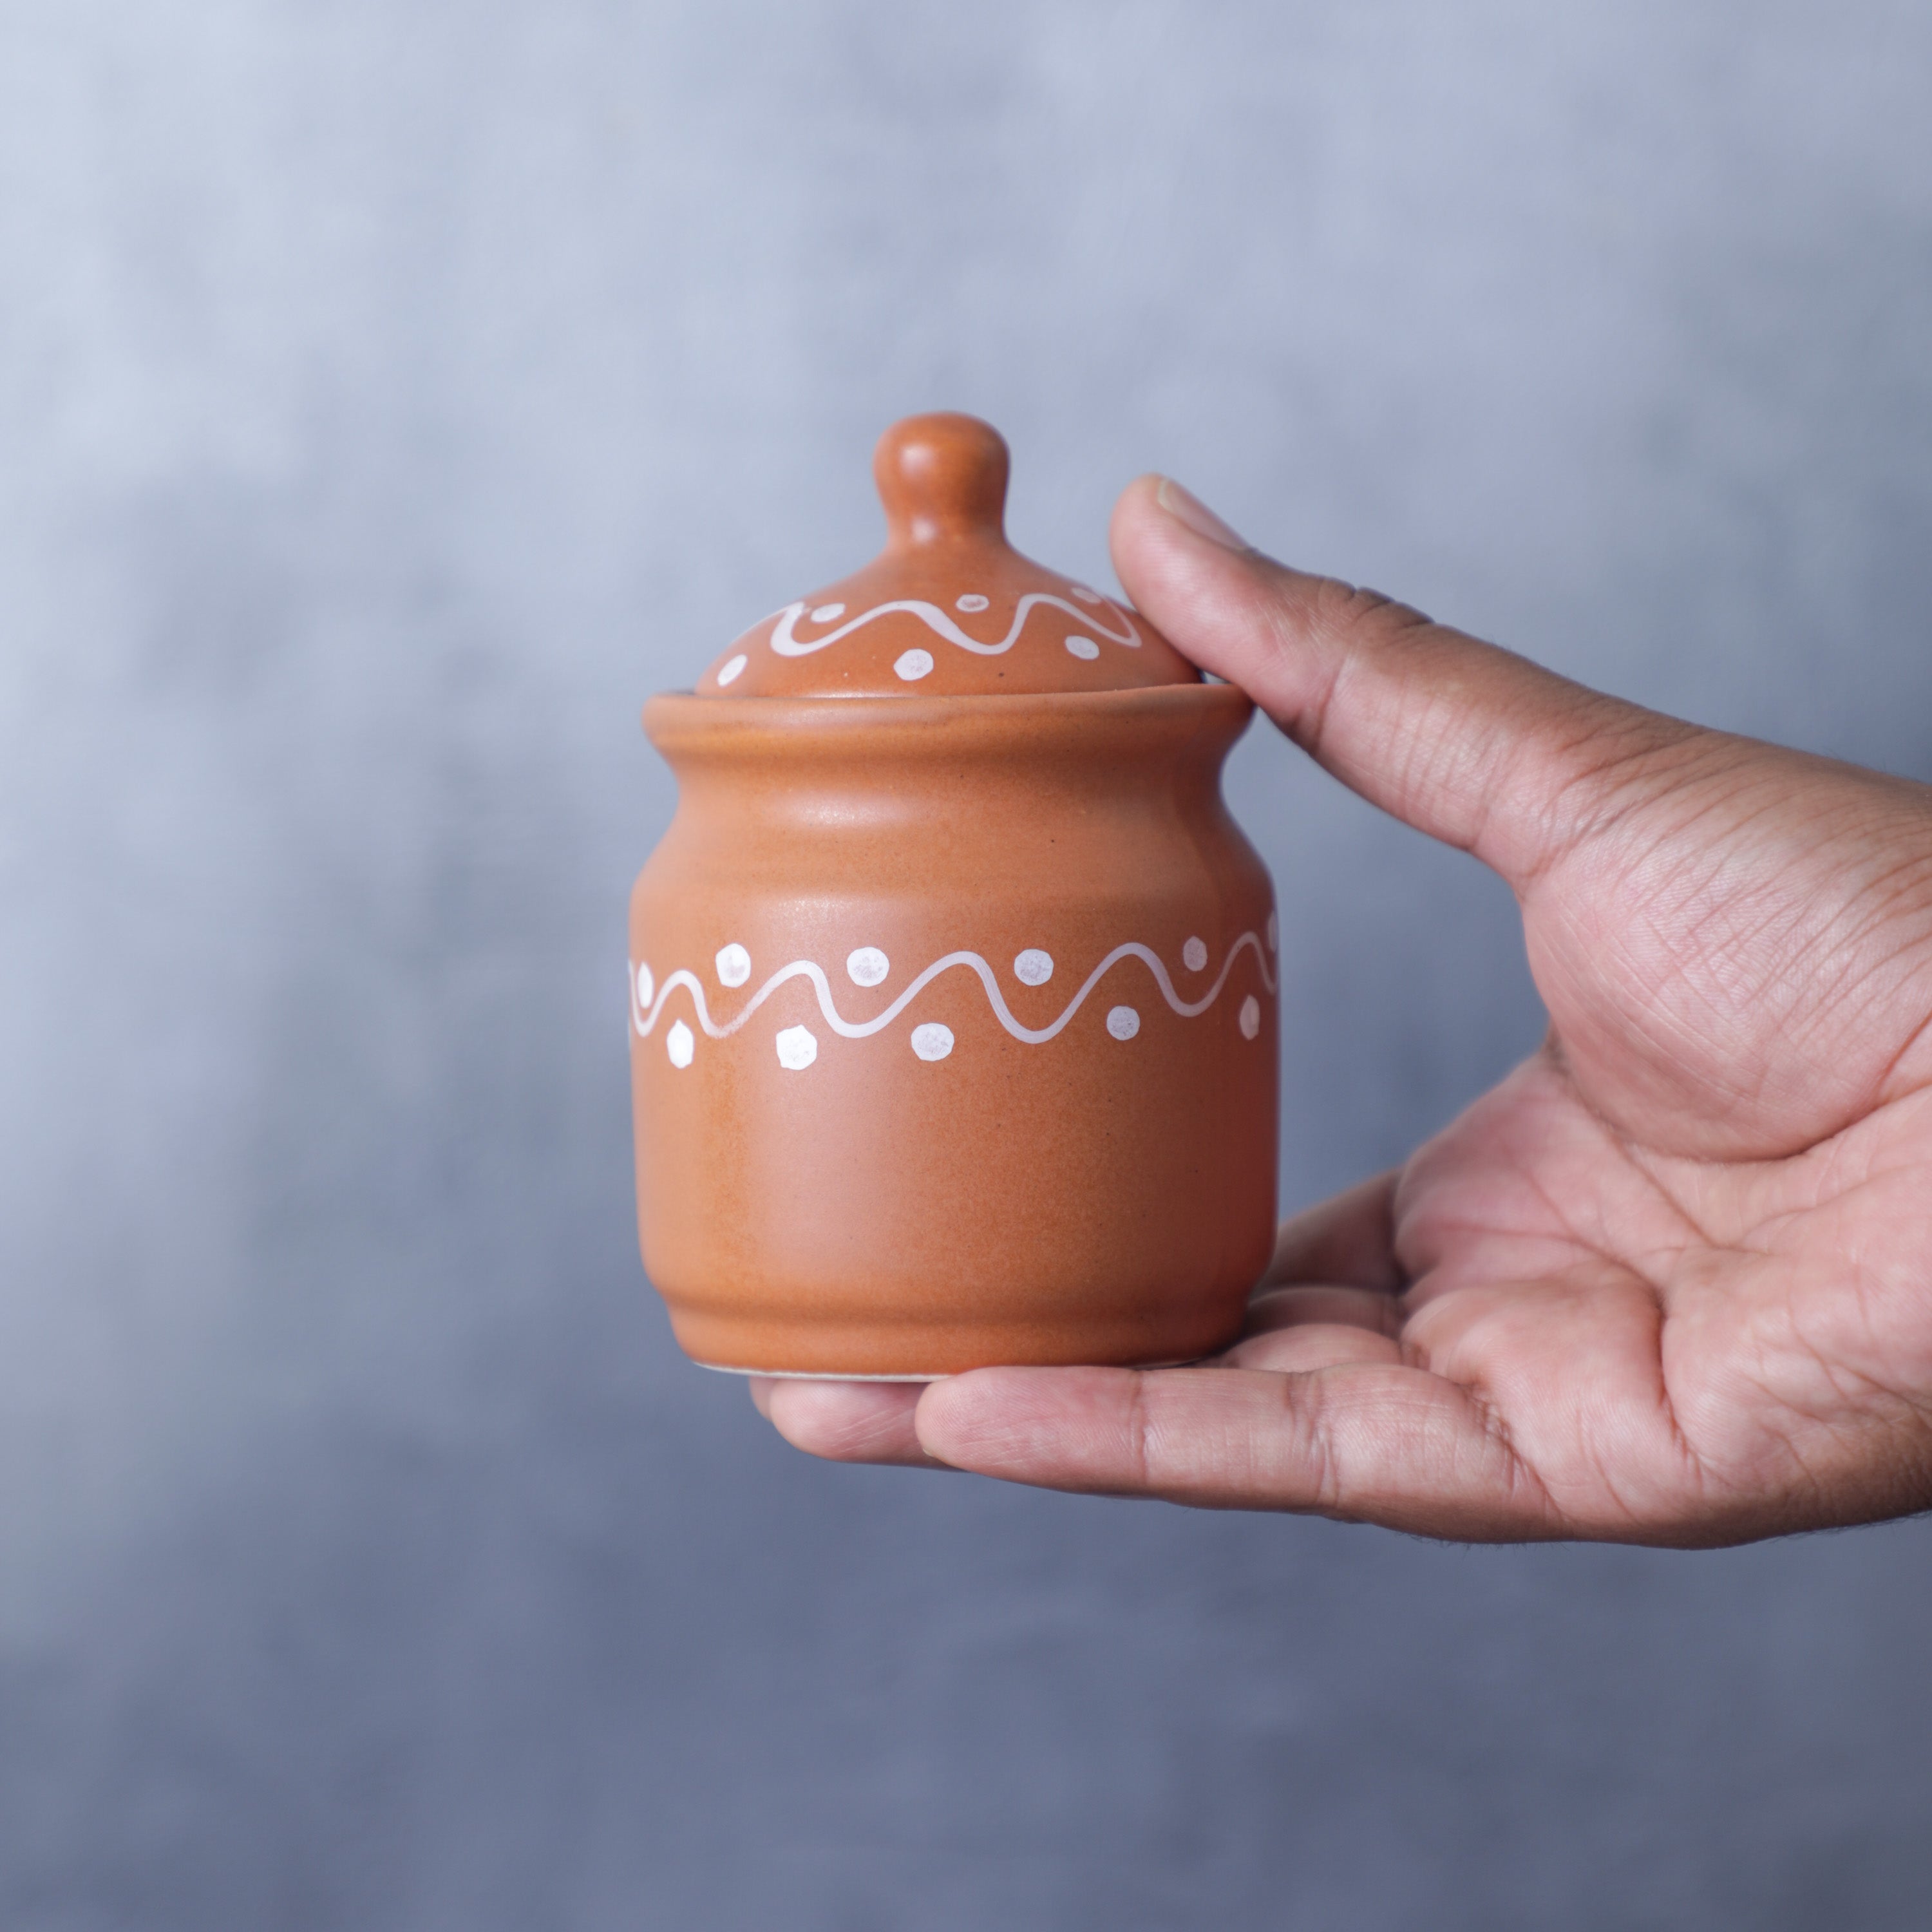 Ceramic Storage Jar with Lid- Proudly Made in India from Desifavors